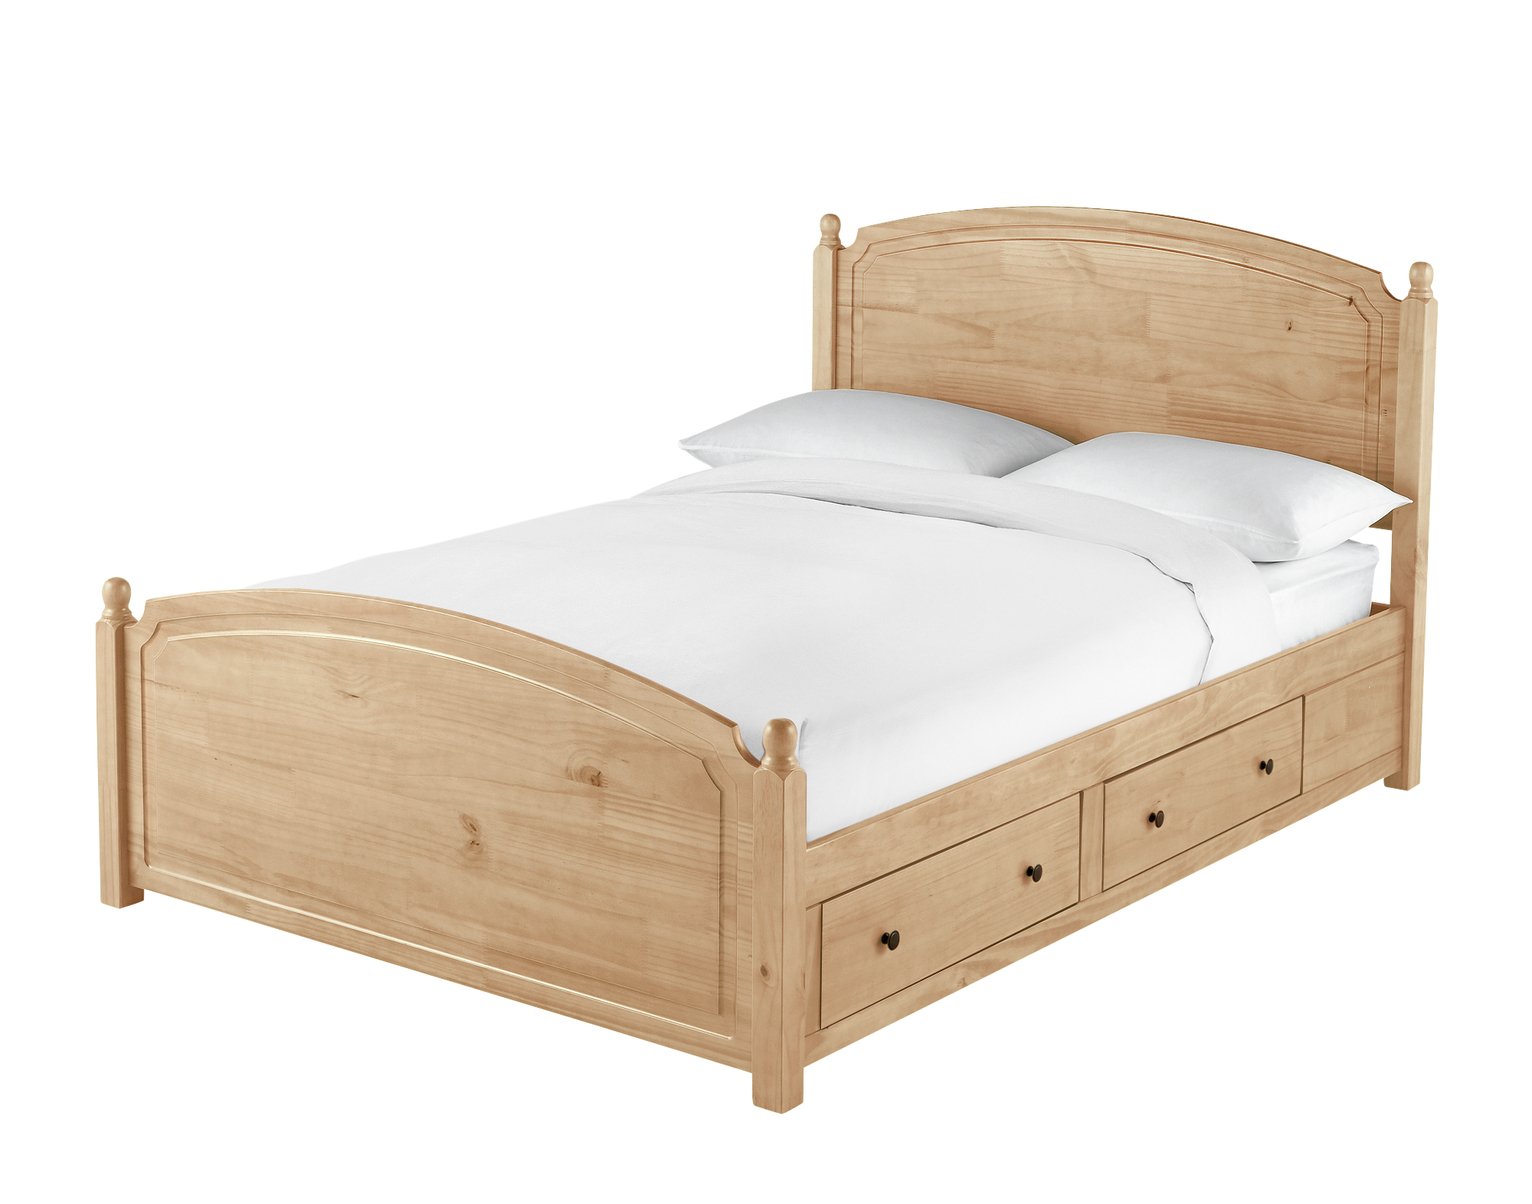 Argos Home Emberton Small Double Wooden Bed Frame - Pine